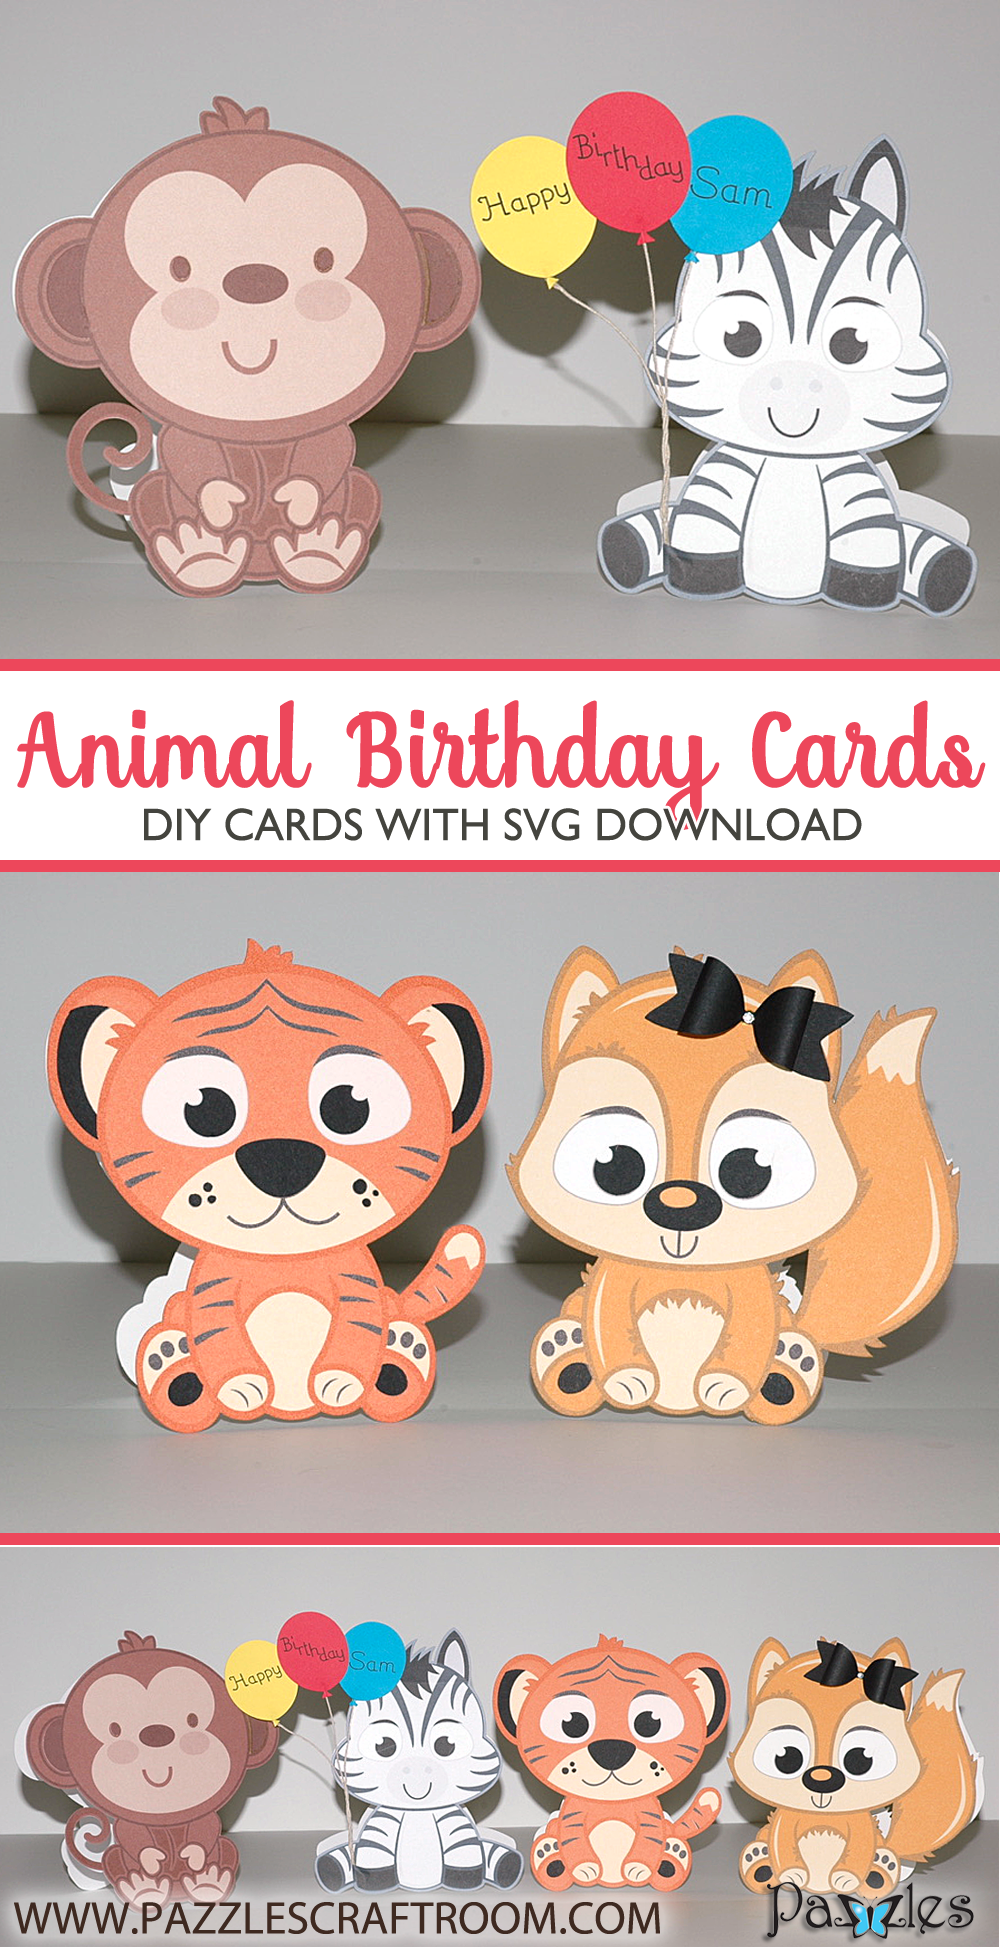 Pazzles DIY Baby Animal Cards with instant SVG download. Compatible with all major electronic cutters including Pazzles Inspiration, Cricut, and SIlhouette Cameo. Design by Judy Hanson.